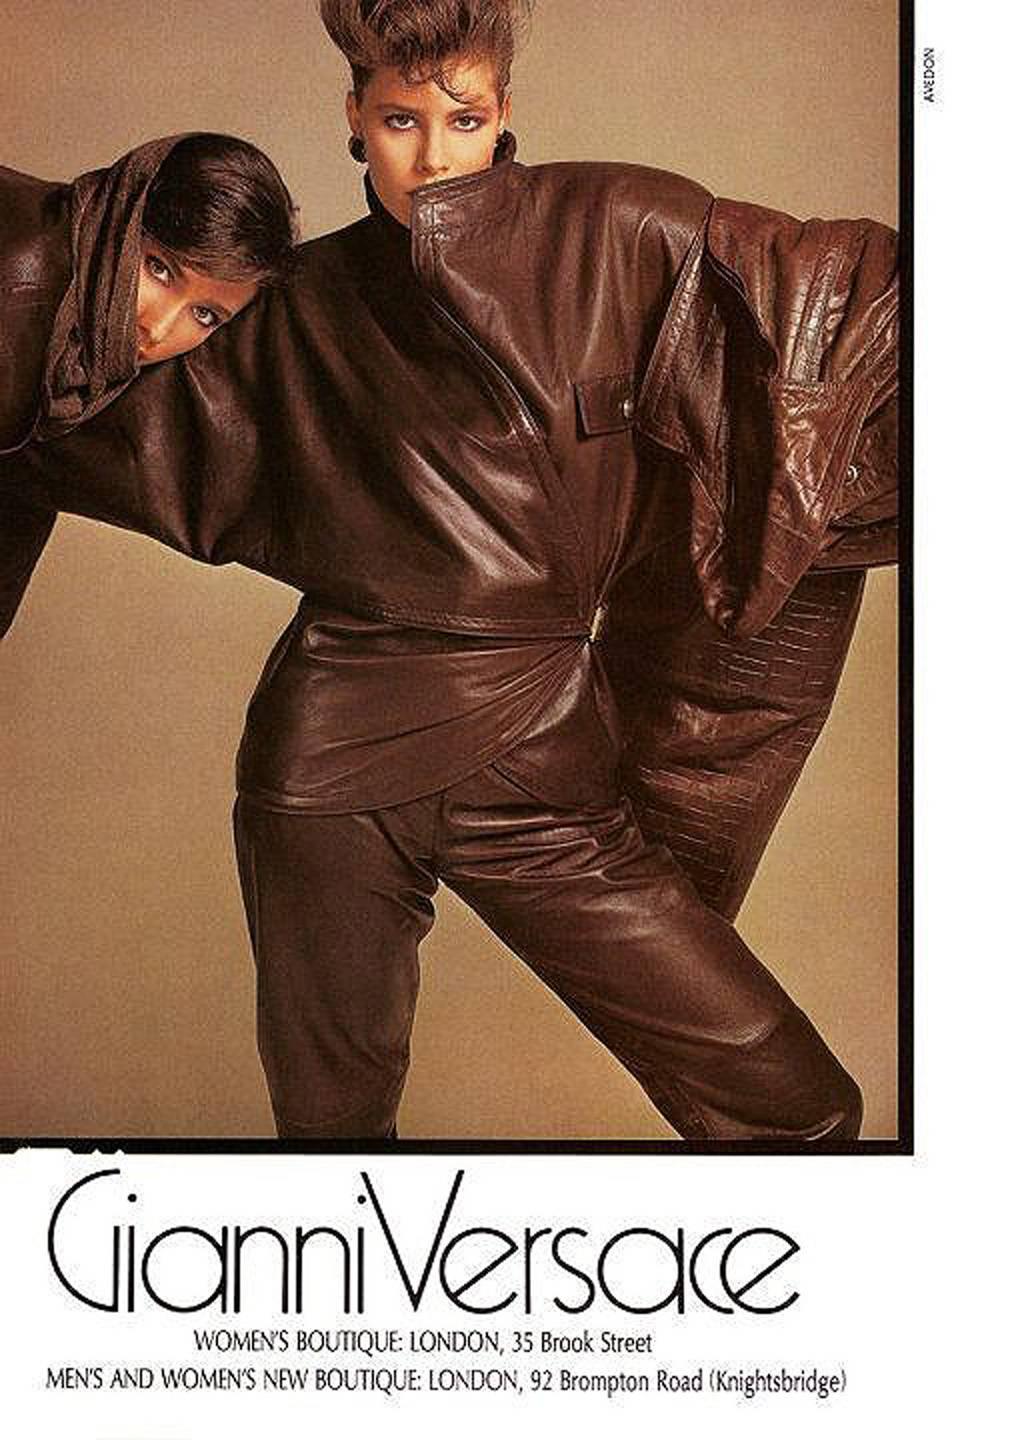 Extremely rare and iconic brown studded ensemble from Gianni Versace's 1984 Fall-Winter collection. The first Versace boutique was opened in 1978 and its popularity was immediate. Today, Versace is one of the world's leading international fashion